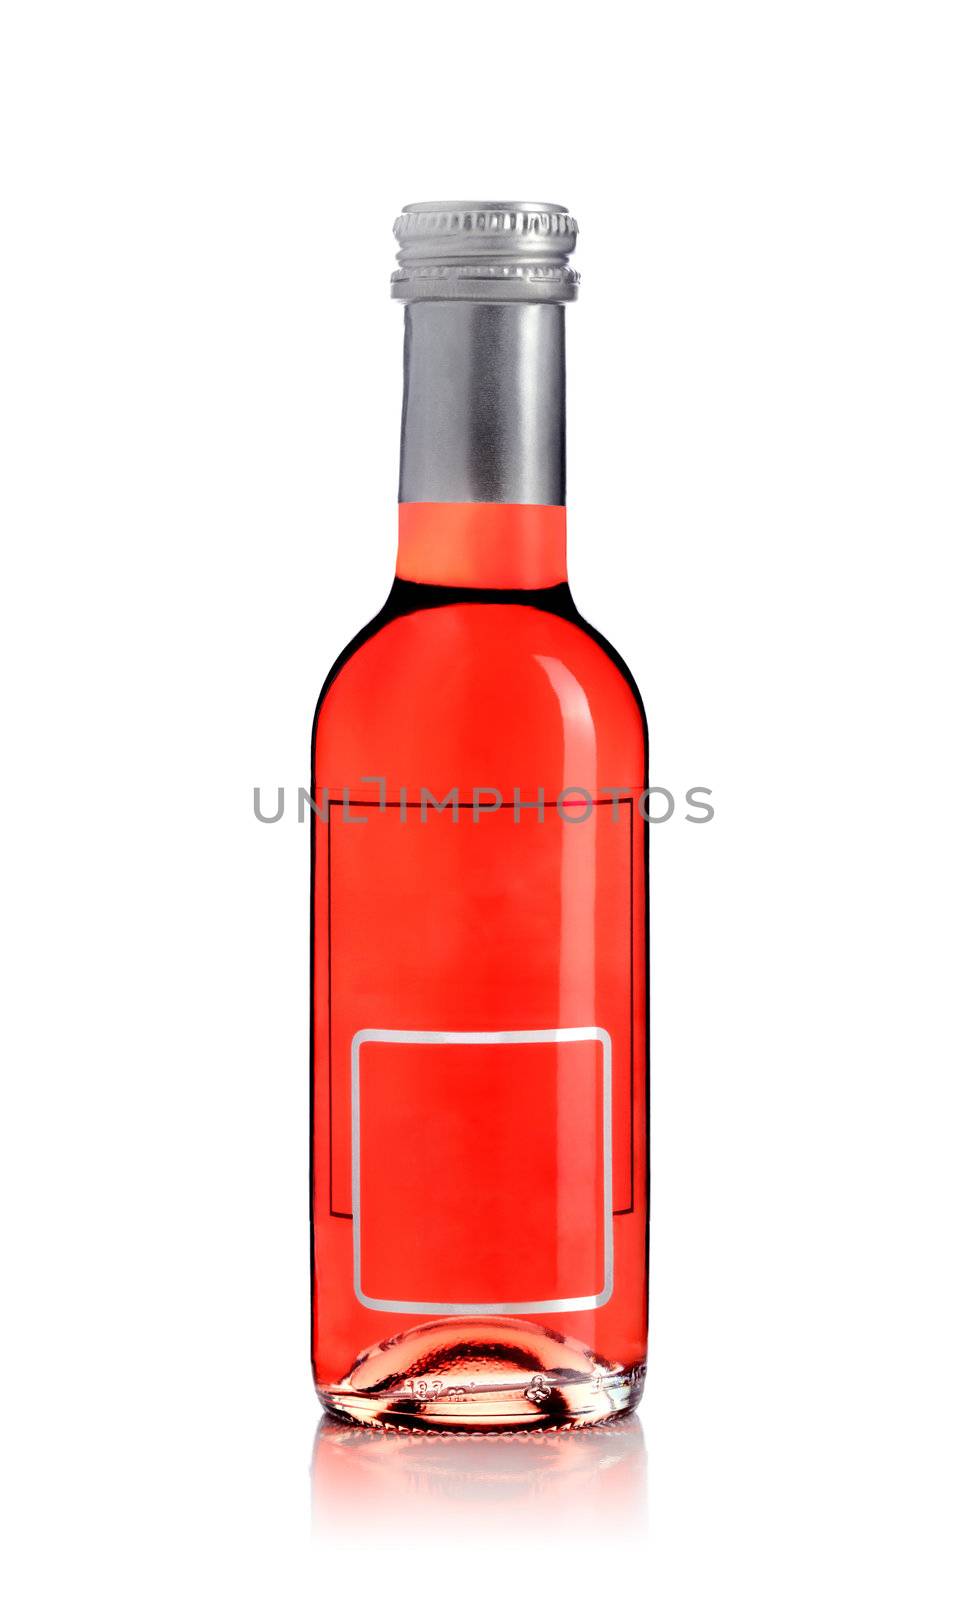 red wine bottle with empty label, isolated on white